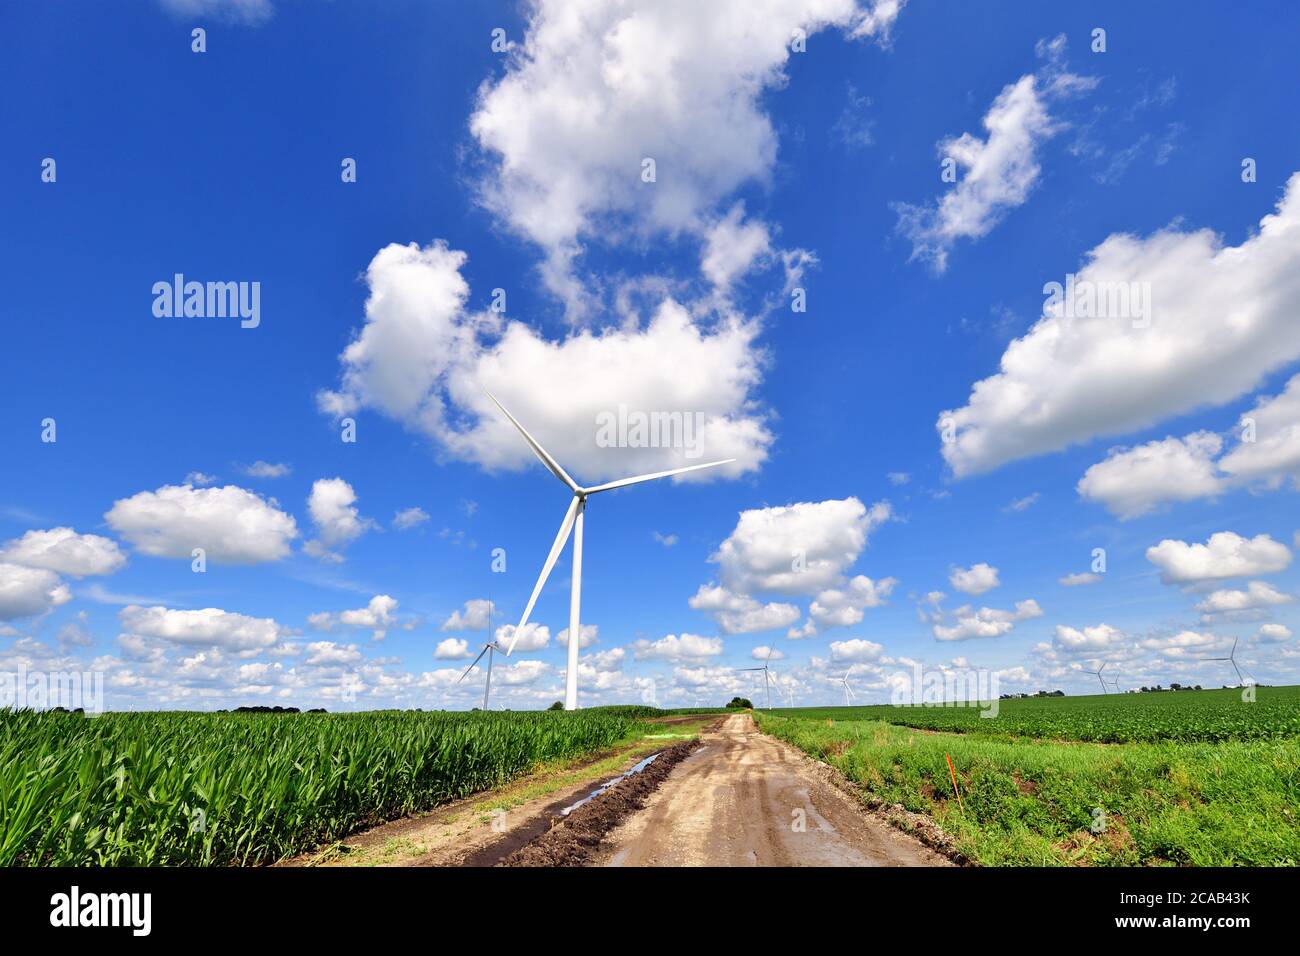 Kernan, Illinois, USA. A wind turbine within a filed of turbines dwarfs the surrounding crops and landscape on a north central Illinois farm. Stock Photo